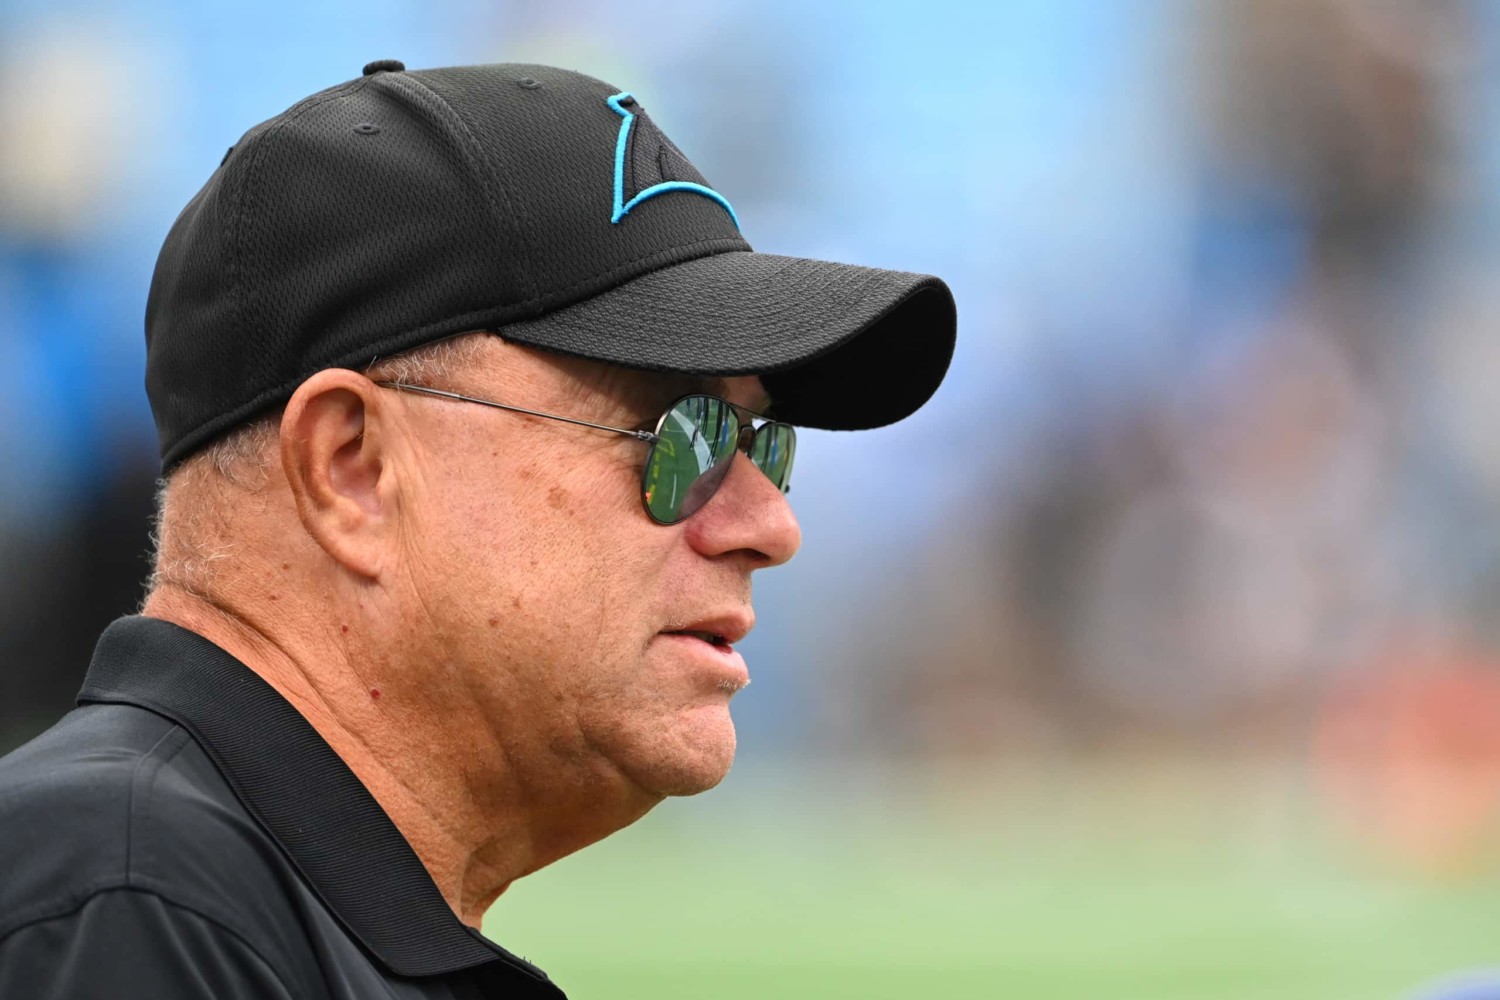 Carolina Panthers owner David Tepper watches from sideline while wearing sunglasses and hat